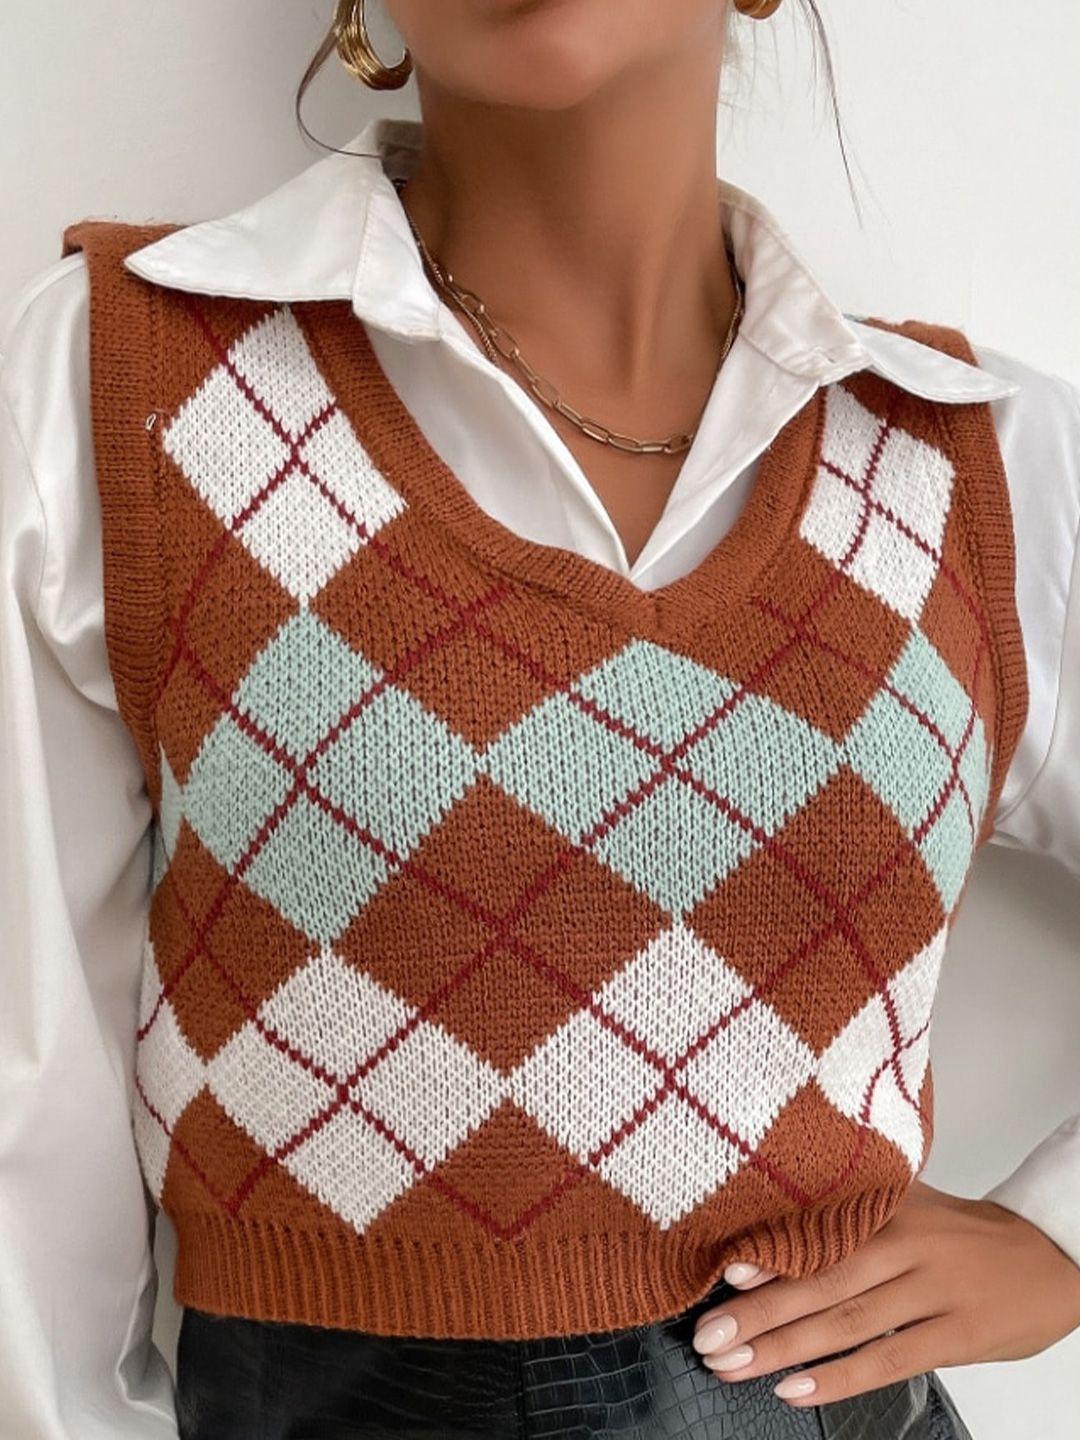 stylecast-brown-checked-crop-sweater-vest